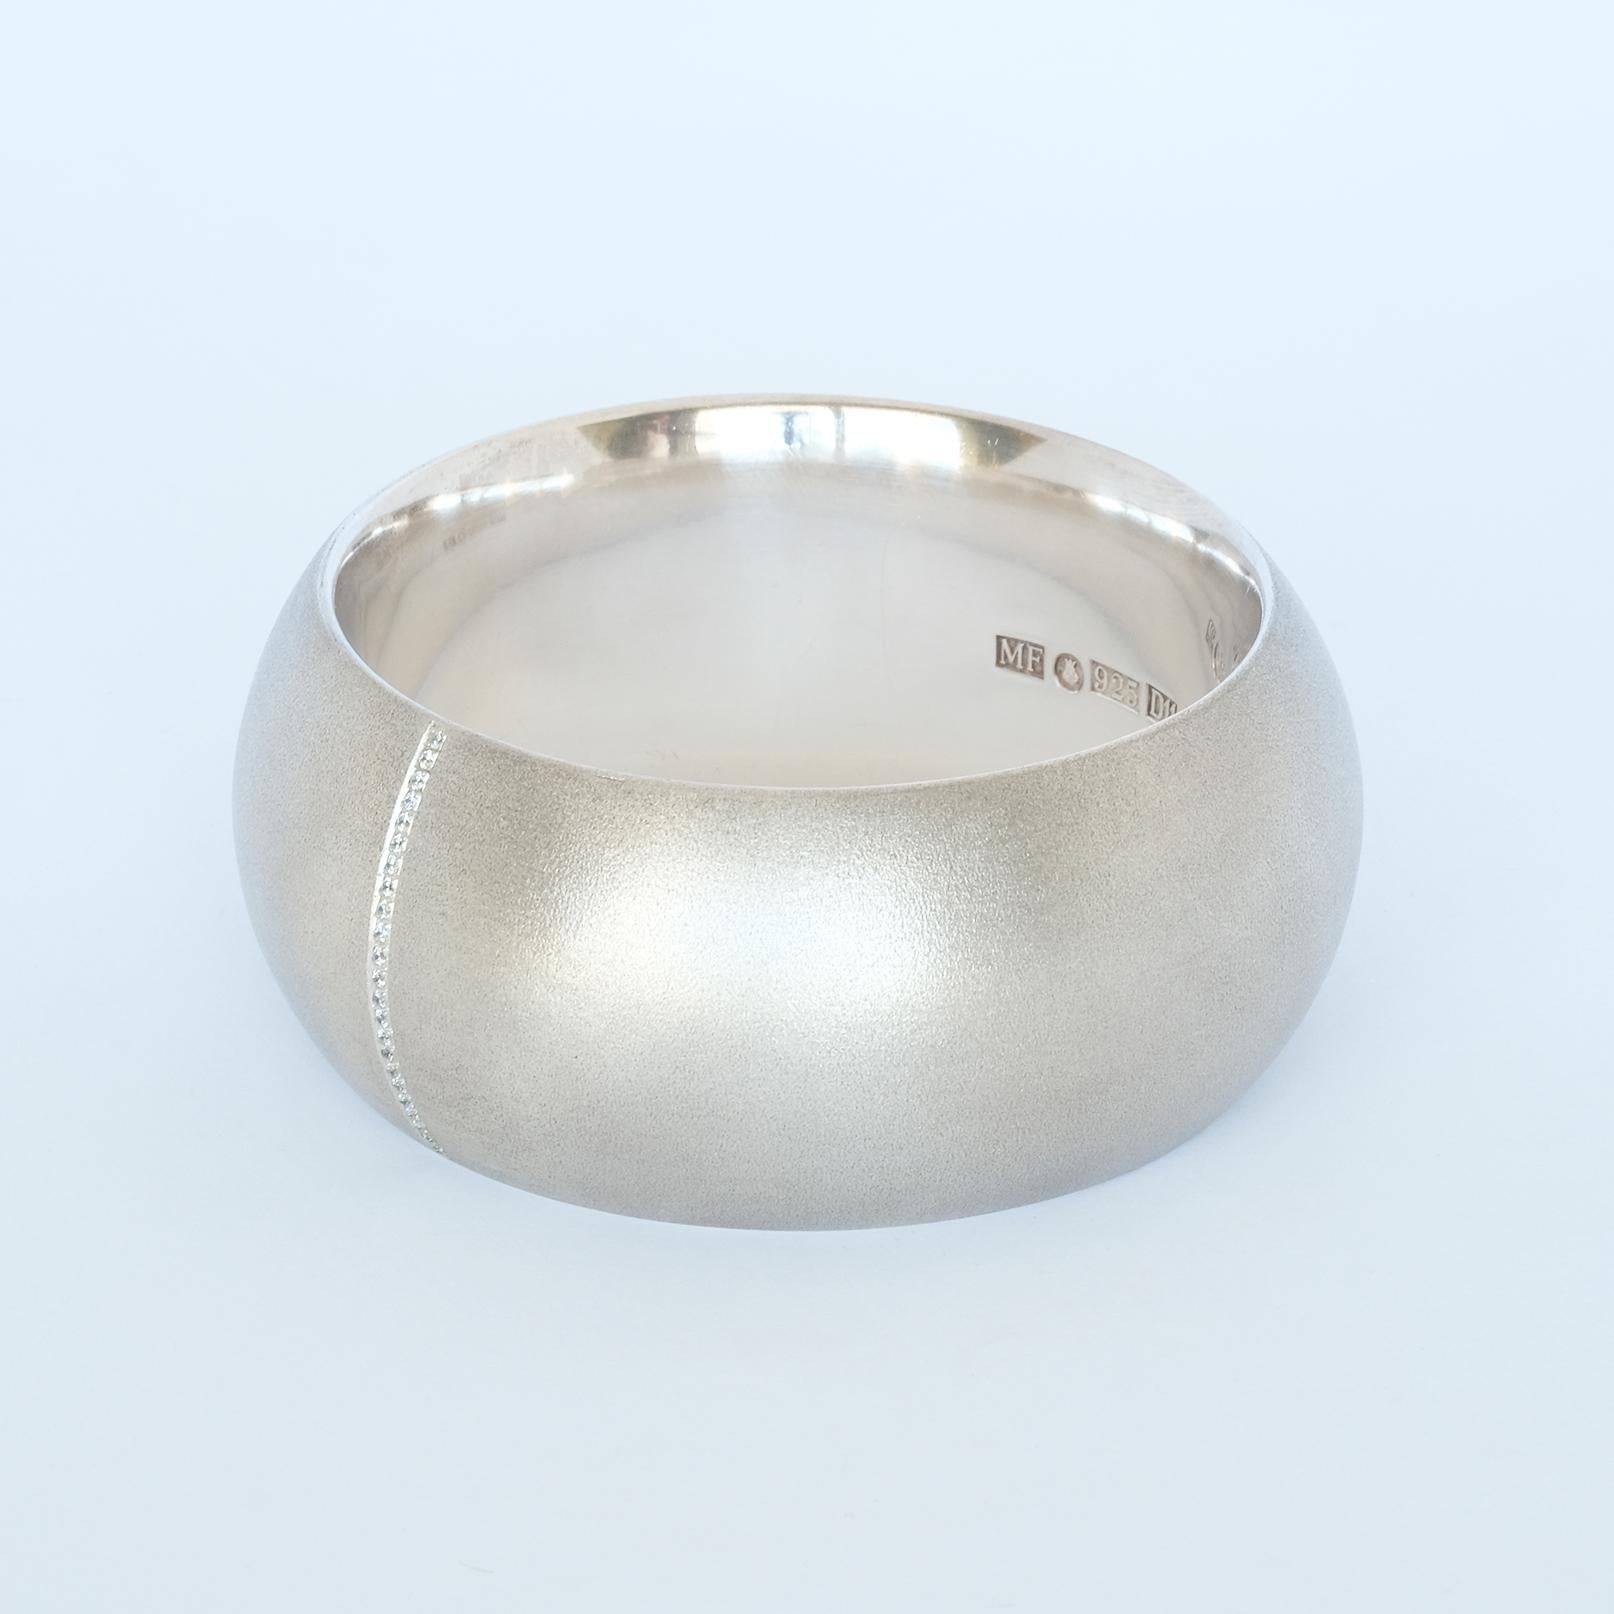 This sterling silver and synthetic diamond bangle is both solid and wide. It has a silky matt surface and a ribbon of 23 synthetic diamonds running across.

This bangle brings your thoughts back to the lovely eighties and it manages to communicate